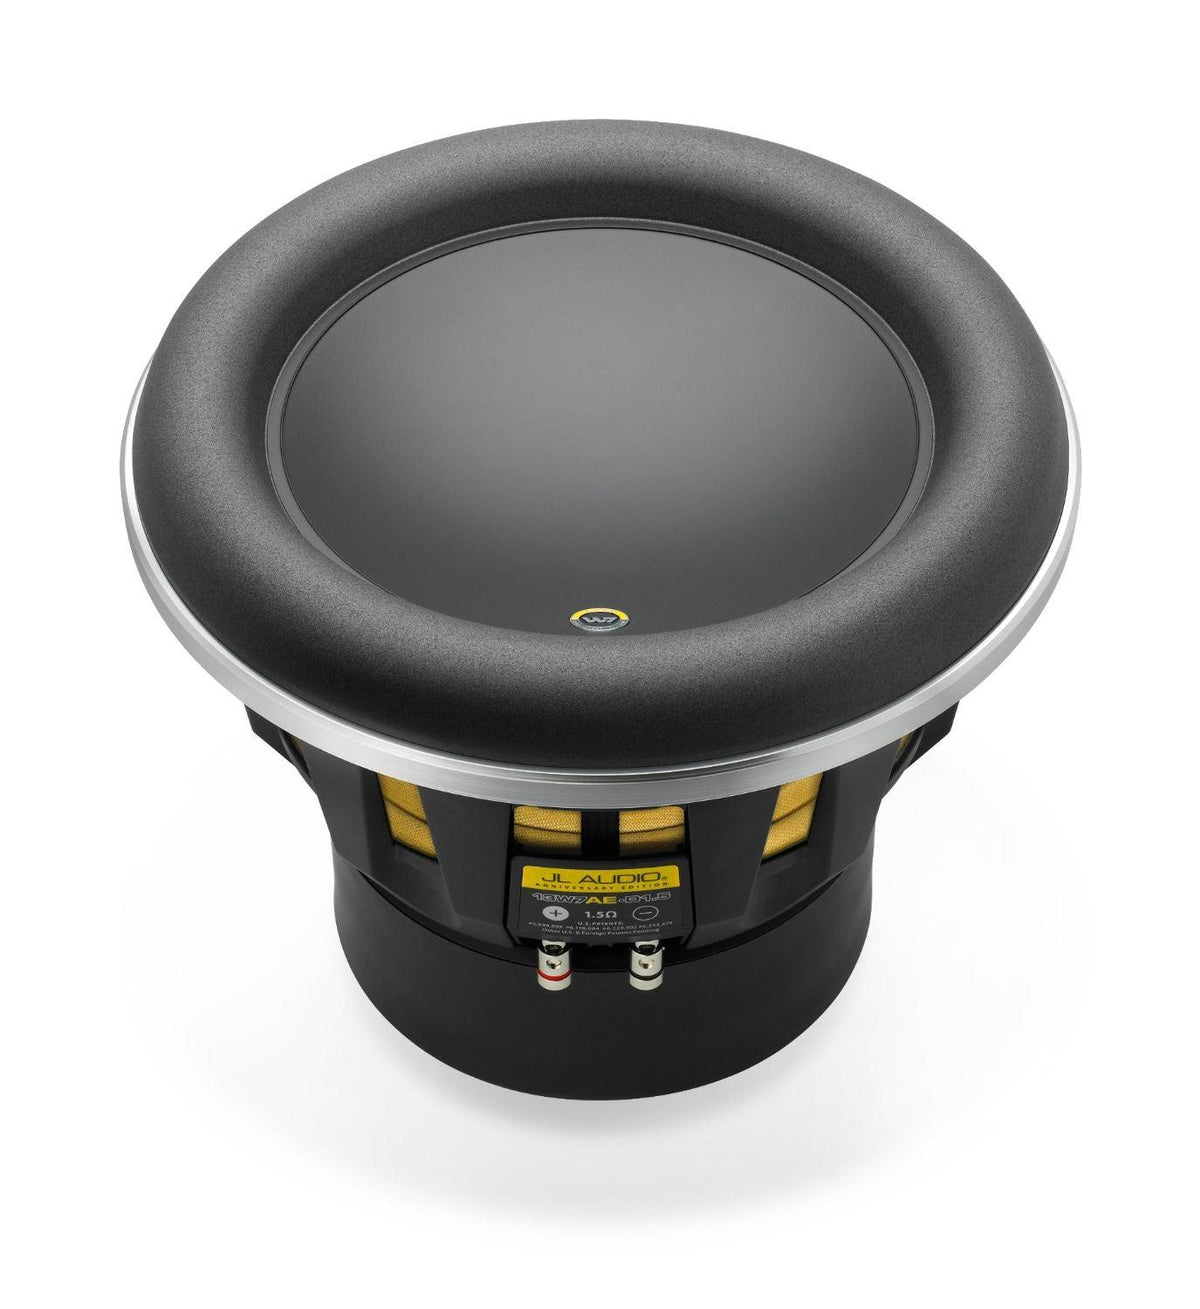 JL Audio 13W7AE-D1.5 Anniversary Edition - 13.5-inch subwoofer driver (1500W, Dual 1.5 ohm voice coils)